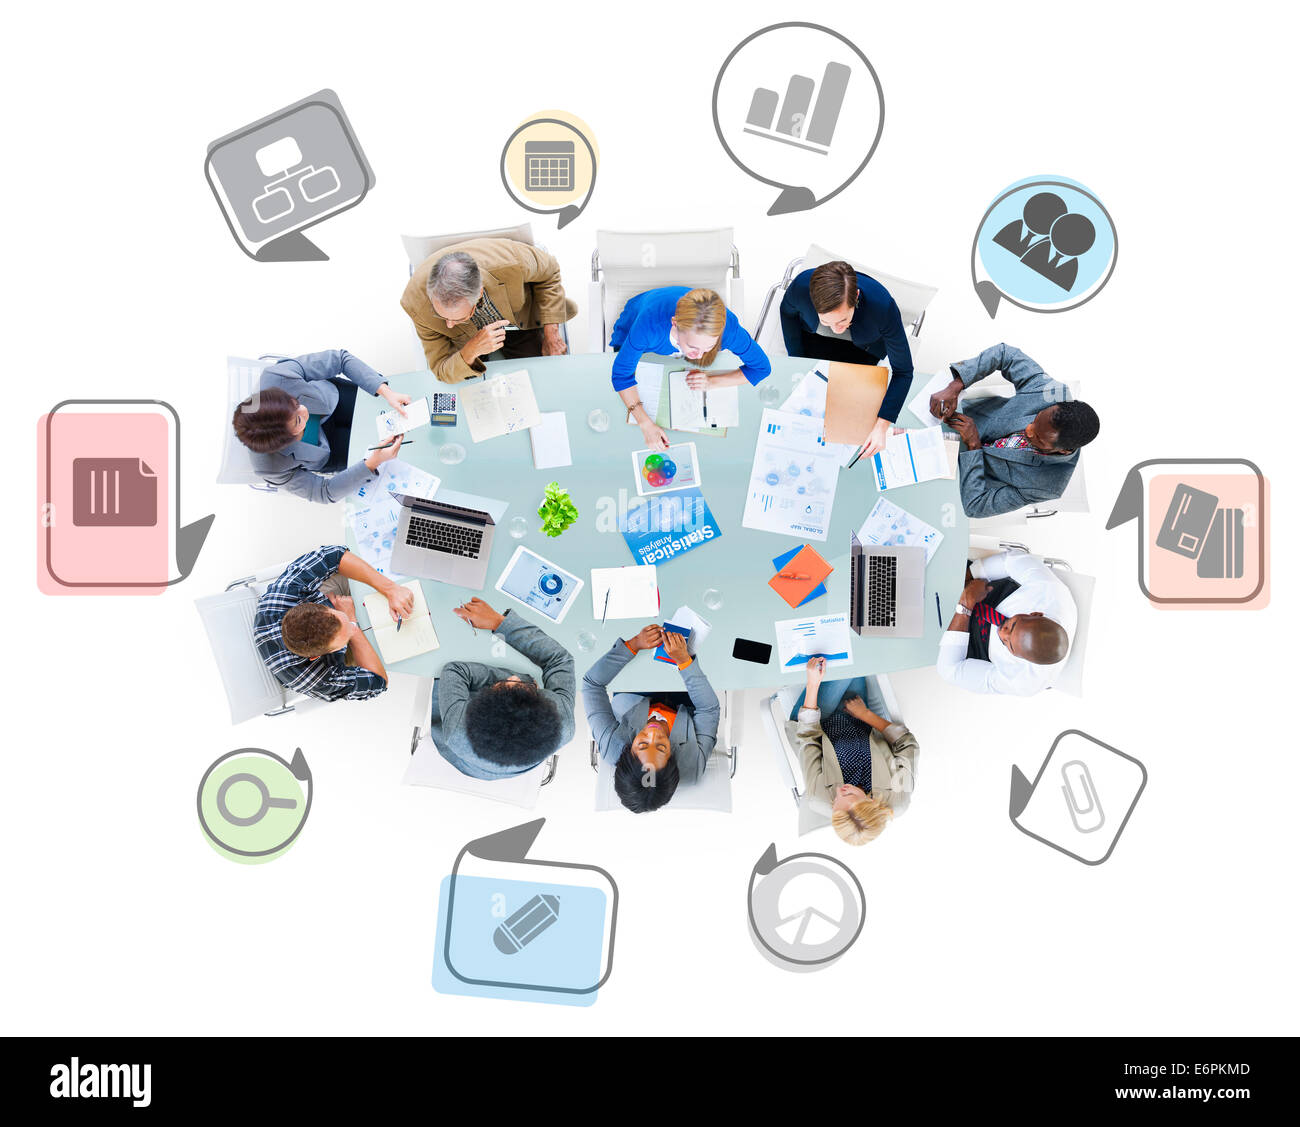 Group of Business People in a Meeting with Business Symbols Stock Photo